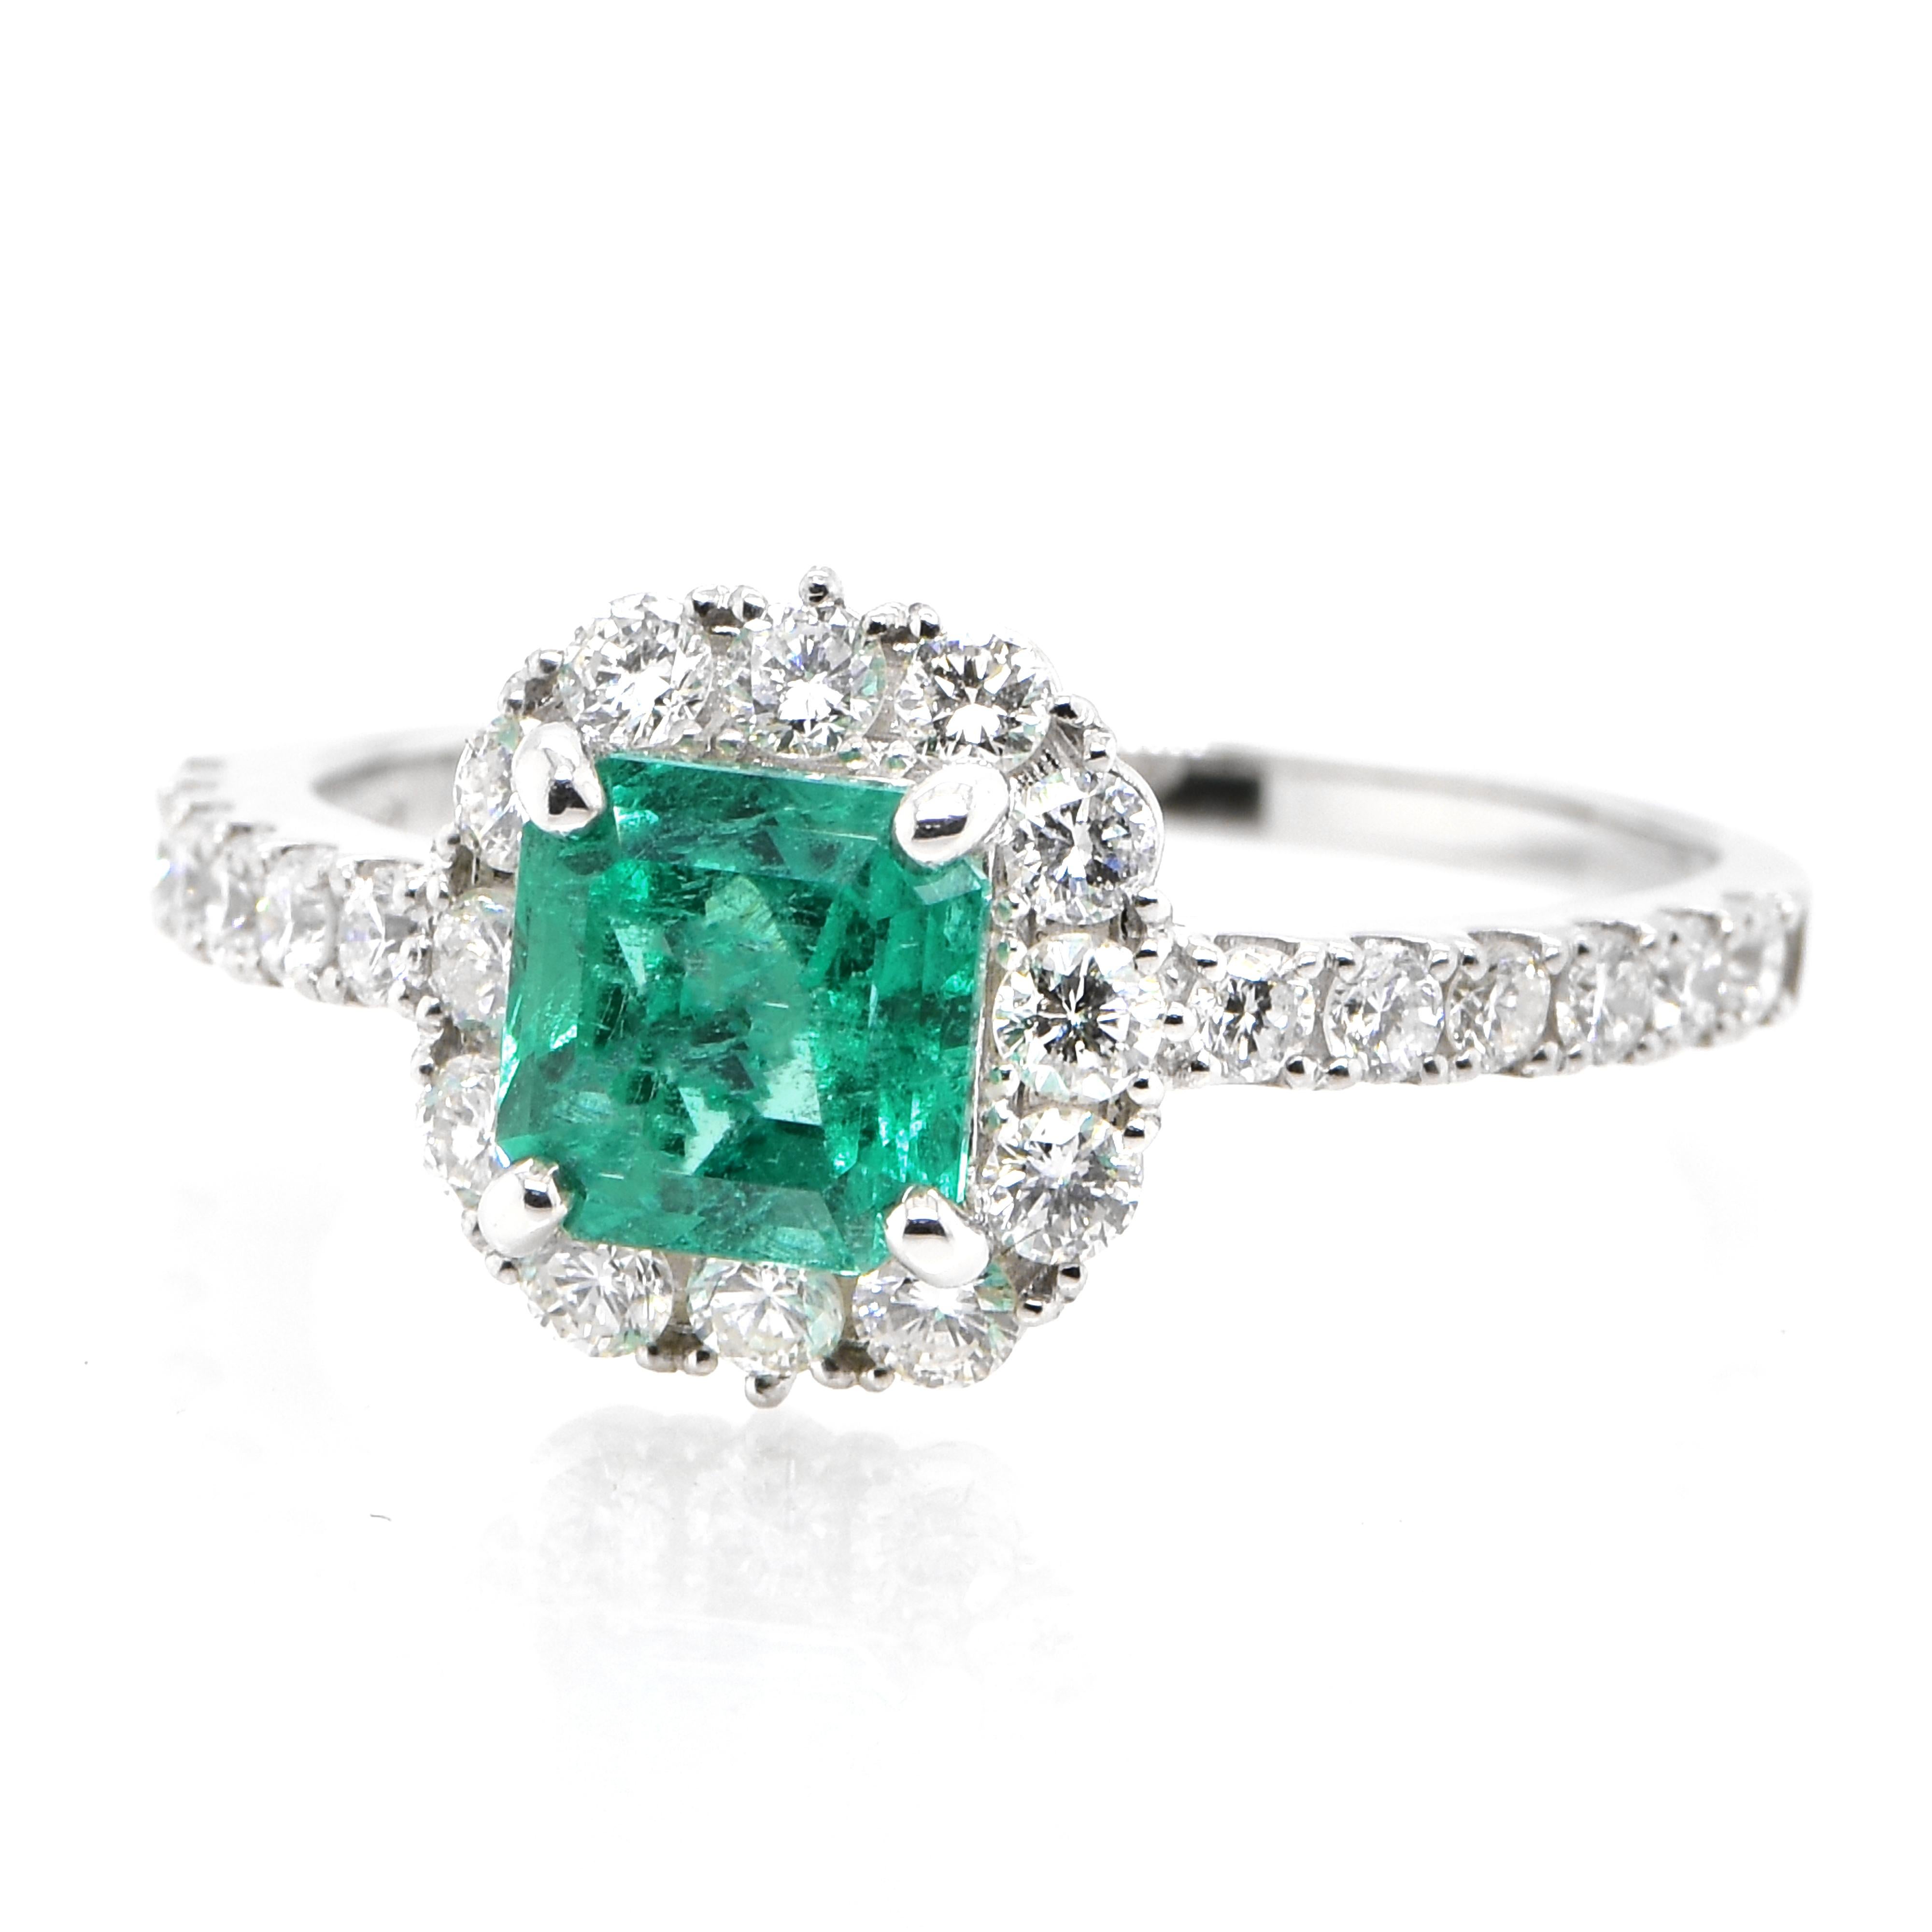 A stunning ring featuring a 1.104 Carat Natural Emerald and 0.67 Carats of Diamond Accents set in Platinum. People have admired emerald’s green for thousands of years. Emeralds have always been associated with the lushest landscapes and the richest